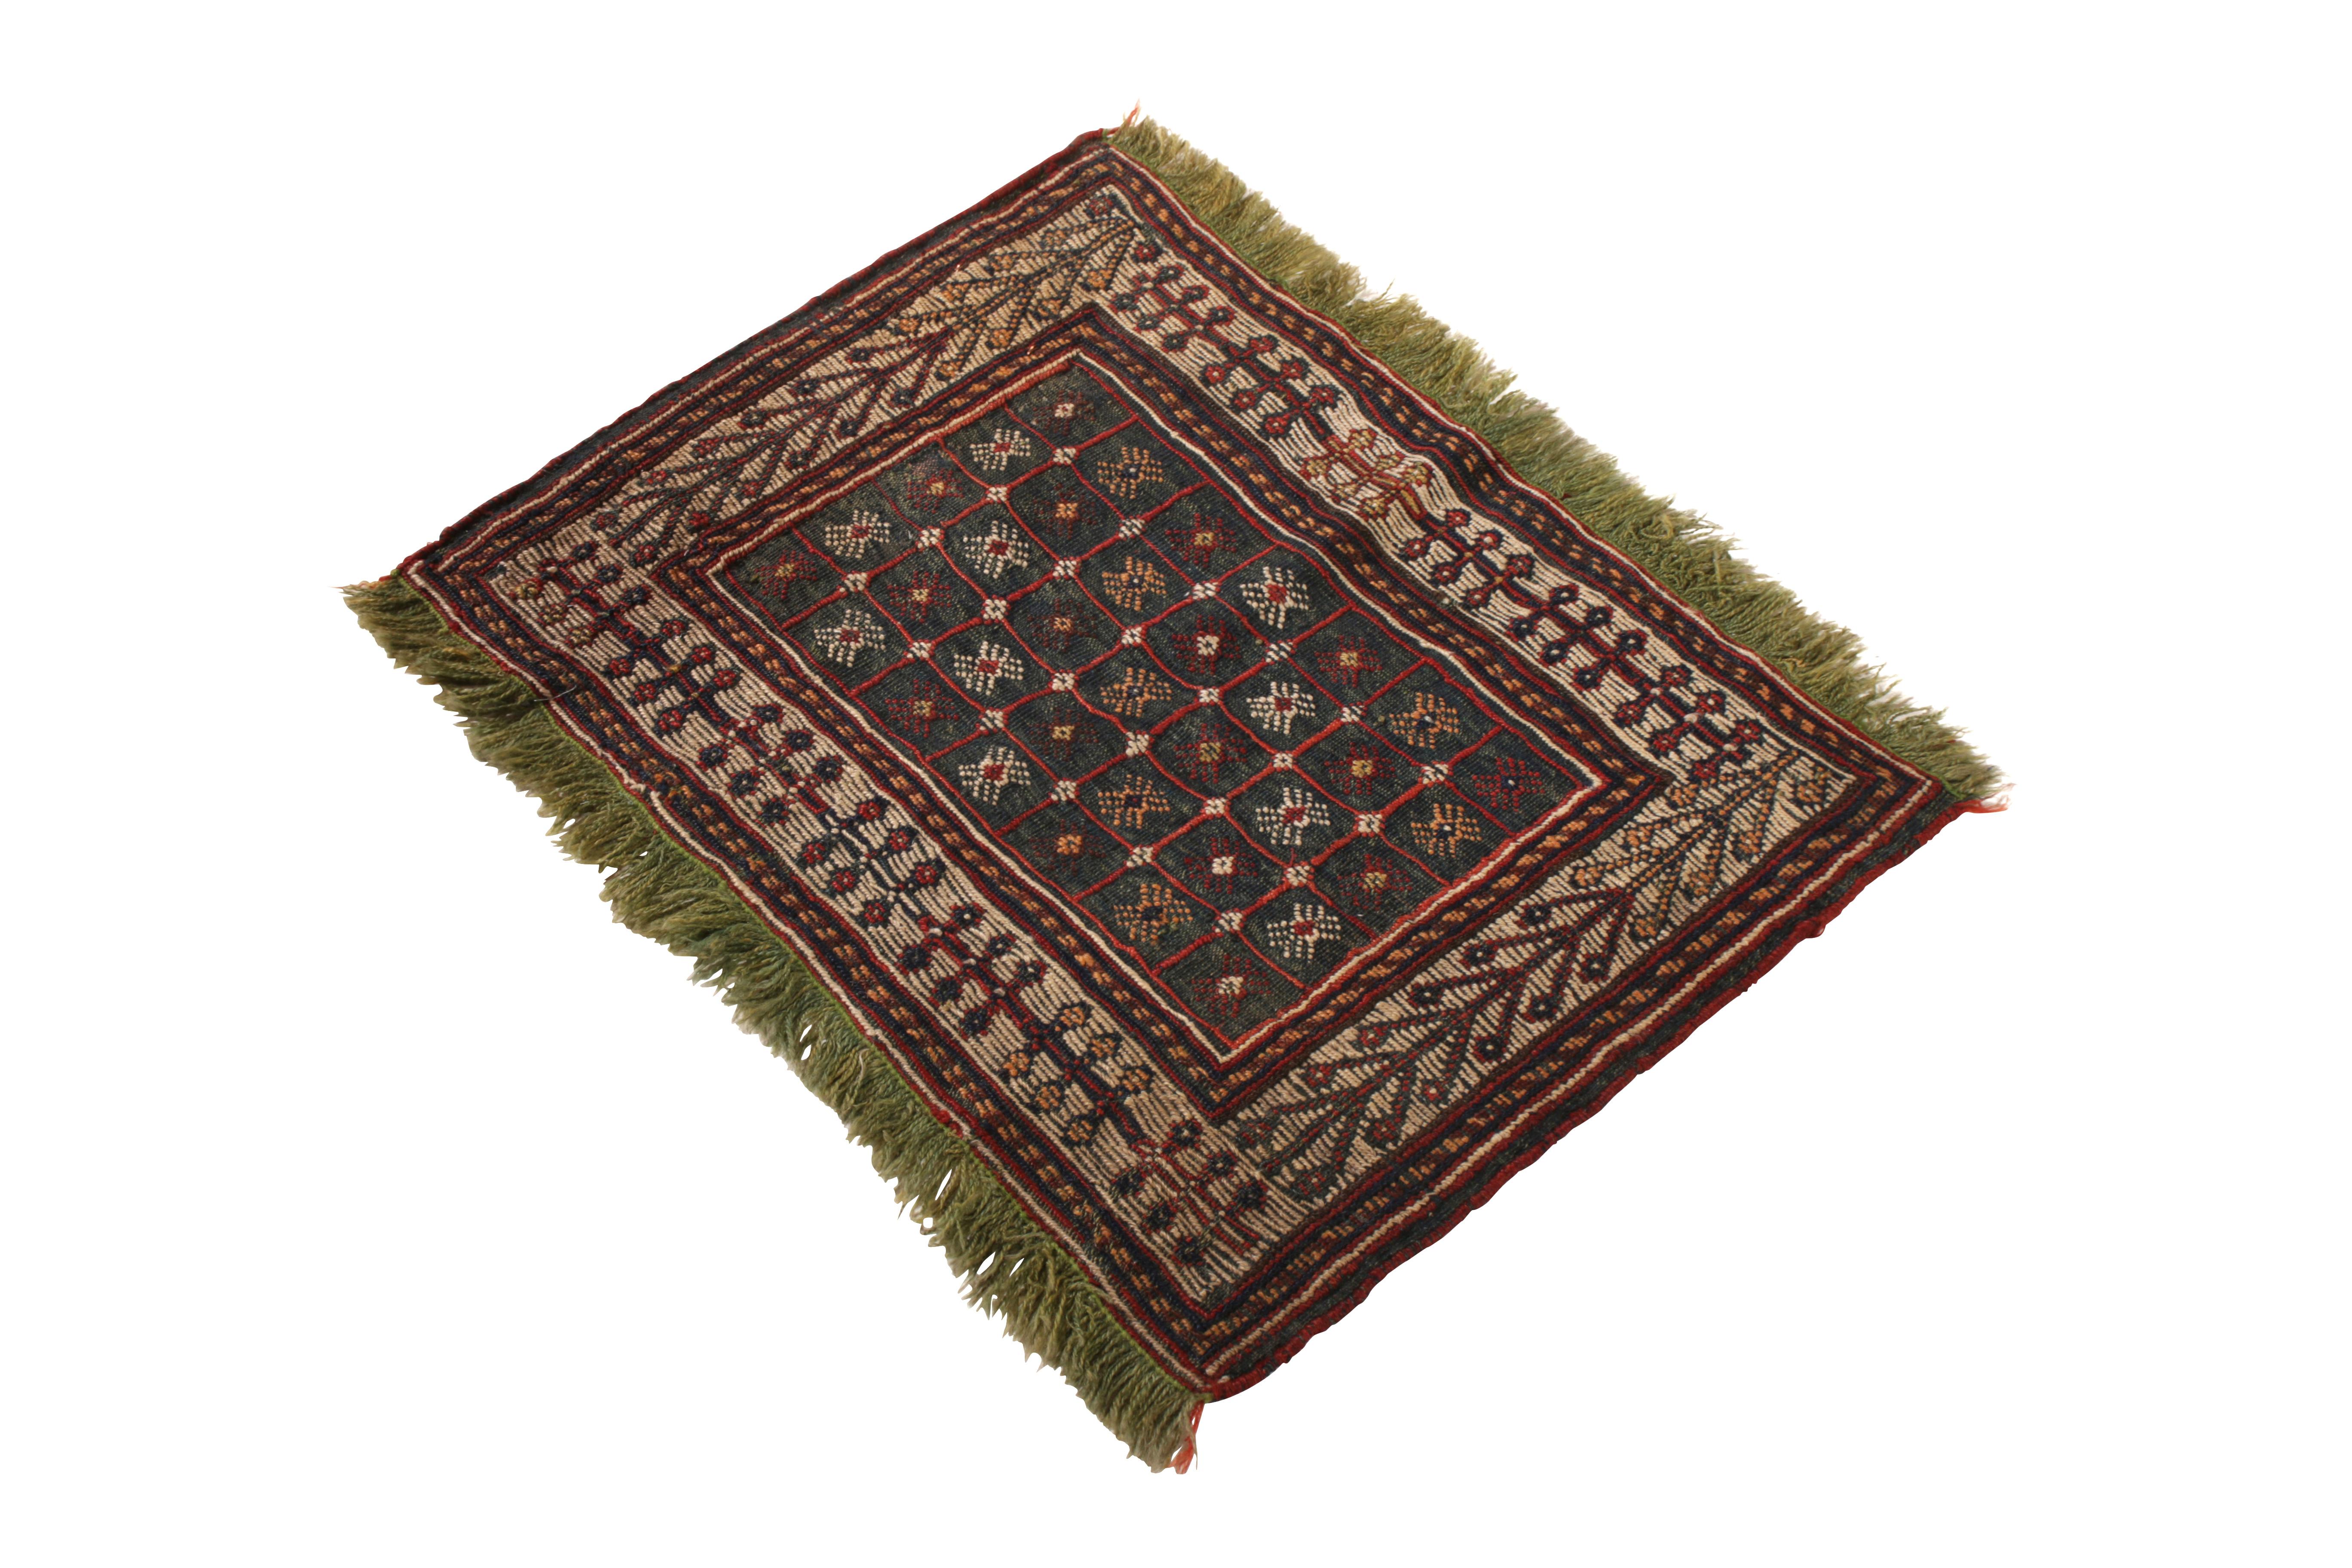 Originating from Turkey in 1910, this antique Verneh wool kilim rug employs several unique features in its field design, fringe structure, and colorway combination. Flat-woven in high quality wool, the tile pattern of the all over field design